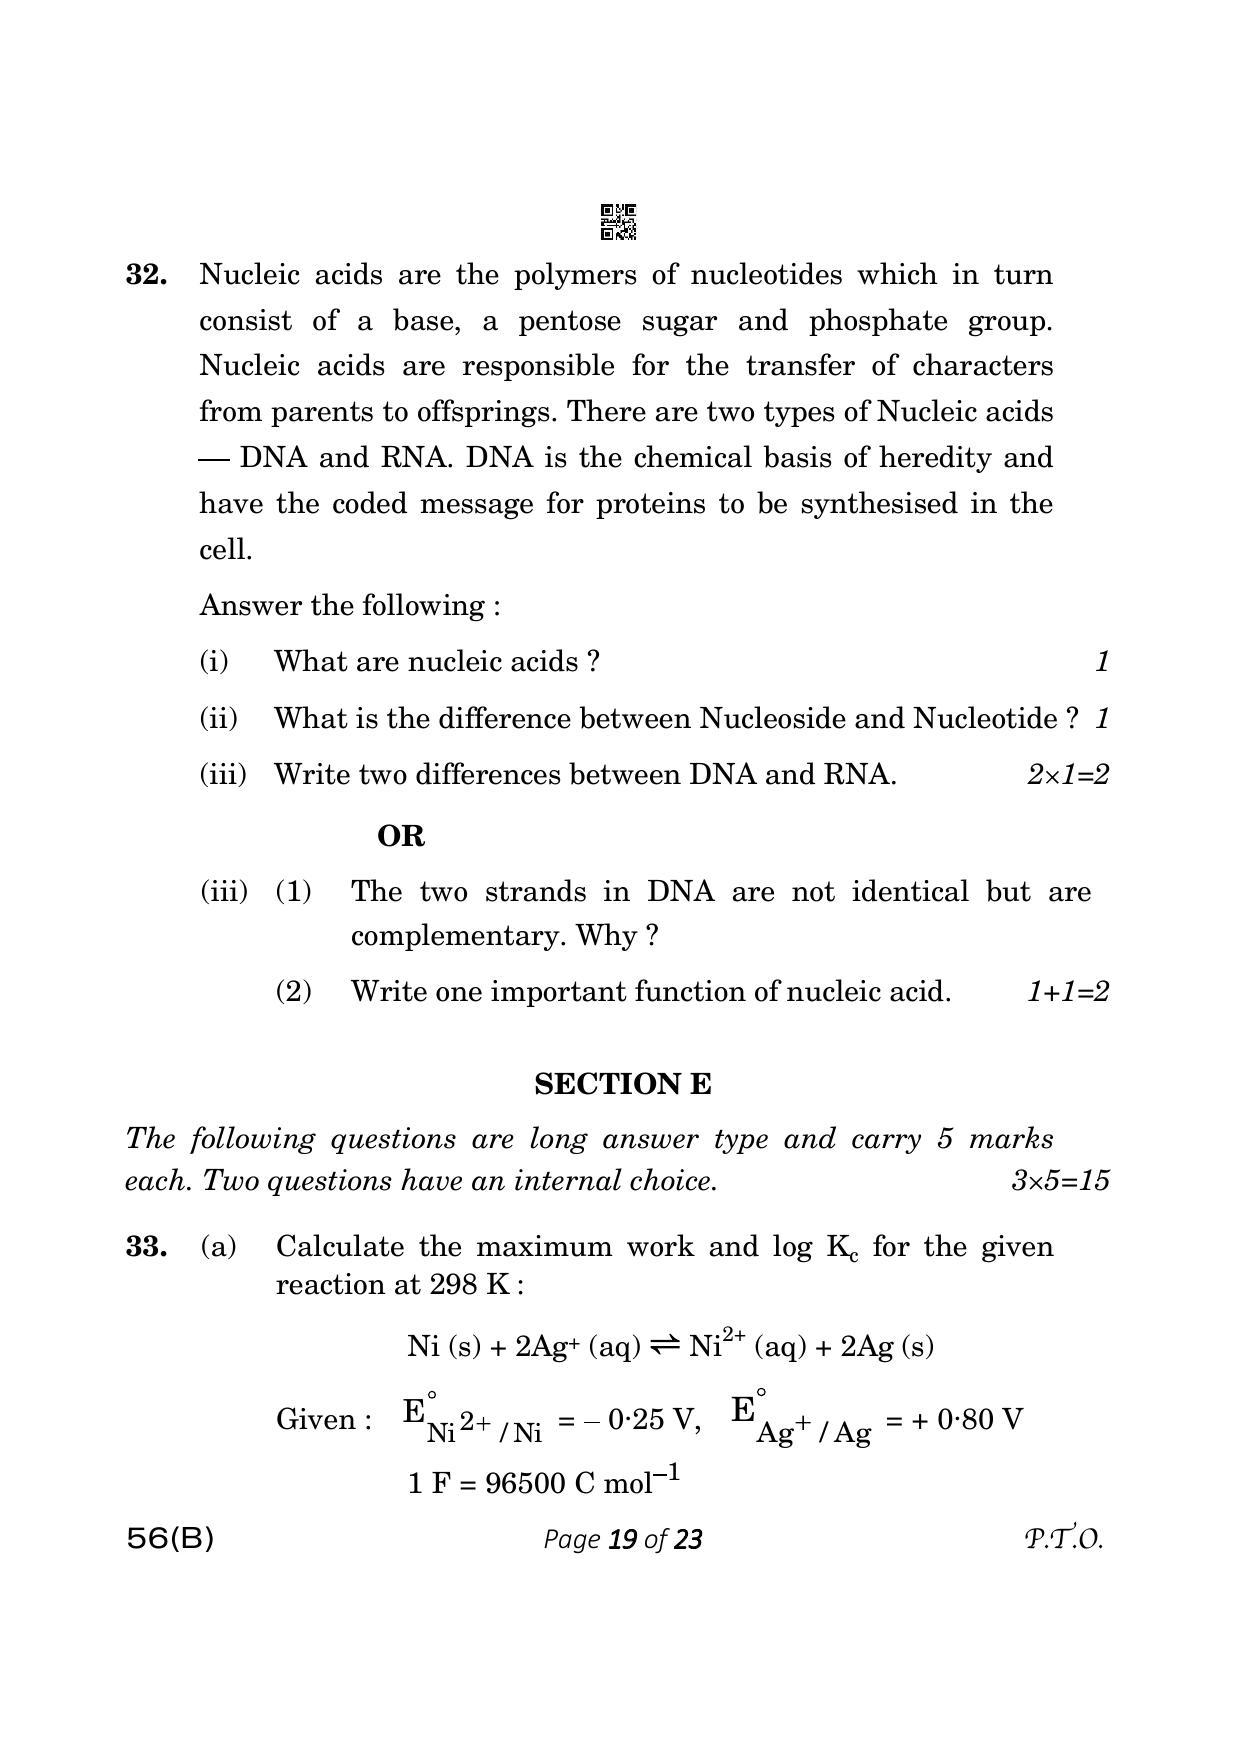 CBSE Class 12 56-B Chemistry 2023 (Compartment) Question Paper - Page 19